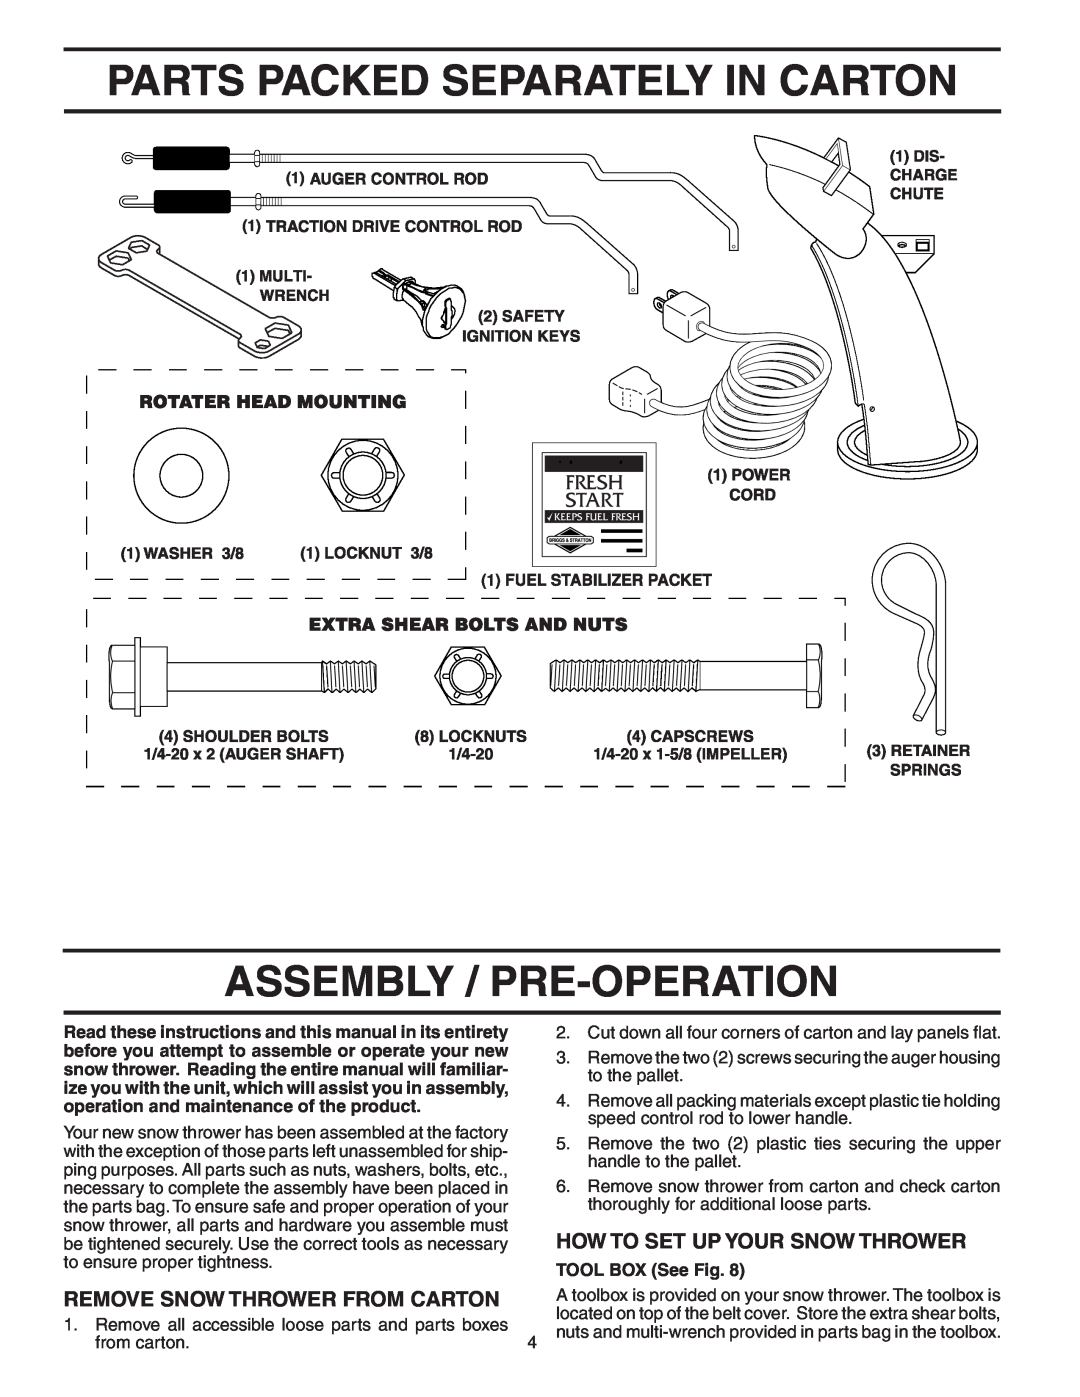 Poulan B8527ES owner manual Parts Packed Separately In Carton Assembly / Pre-Operation, How To Set Up Your Snow Thrower 